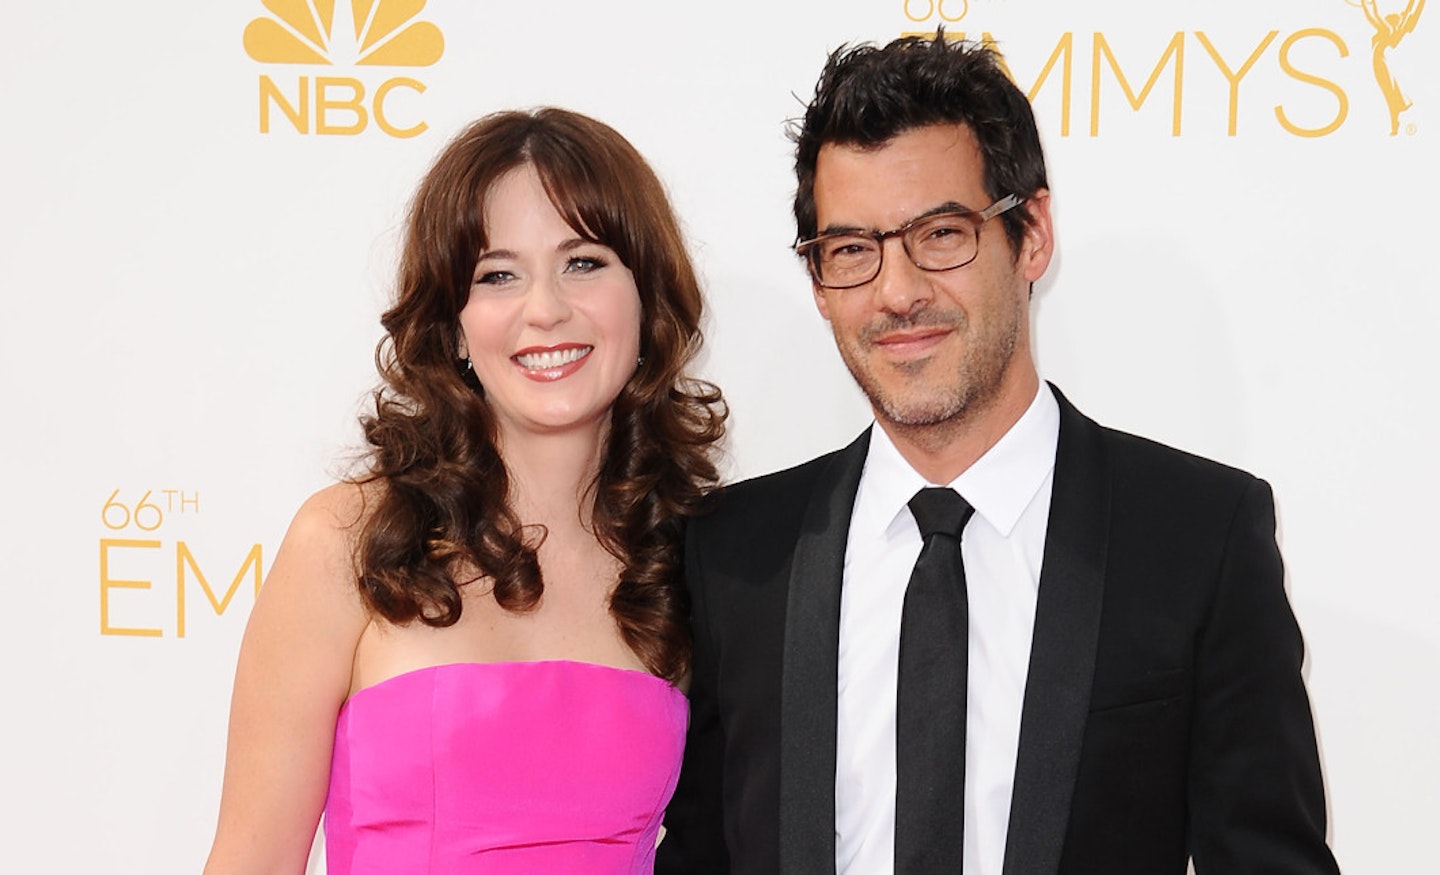 Zooey Deschanel and Jacob Pechenik at the Emmys [Getty]